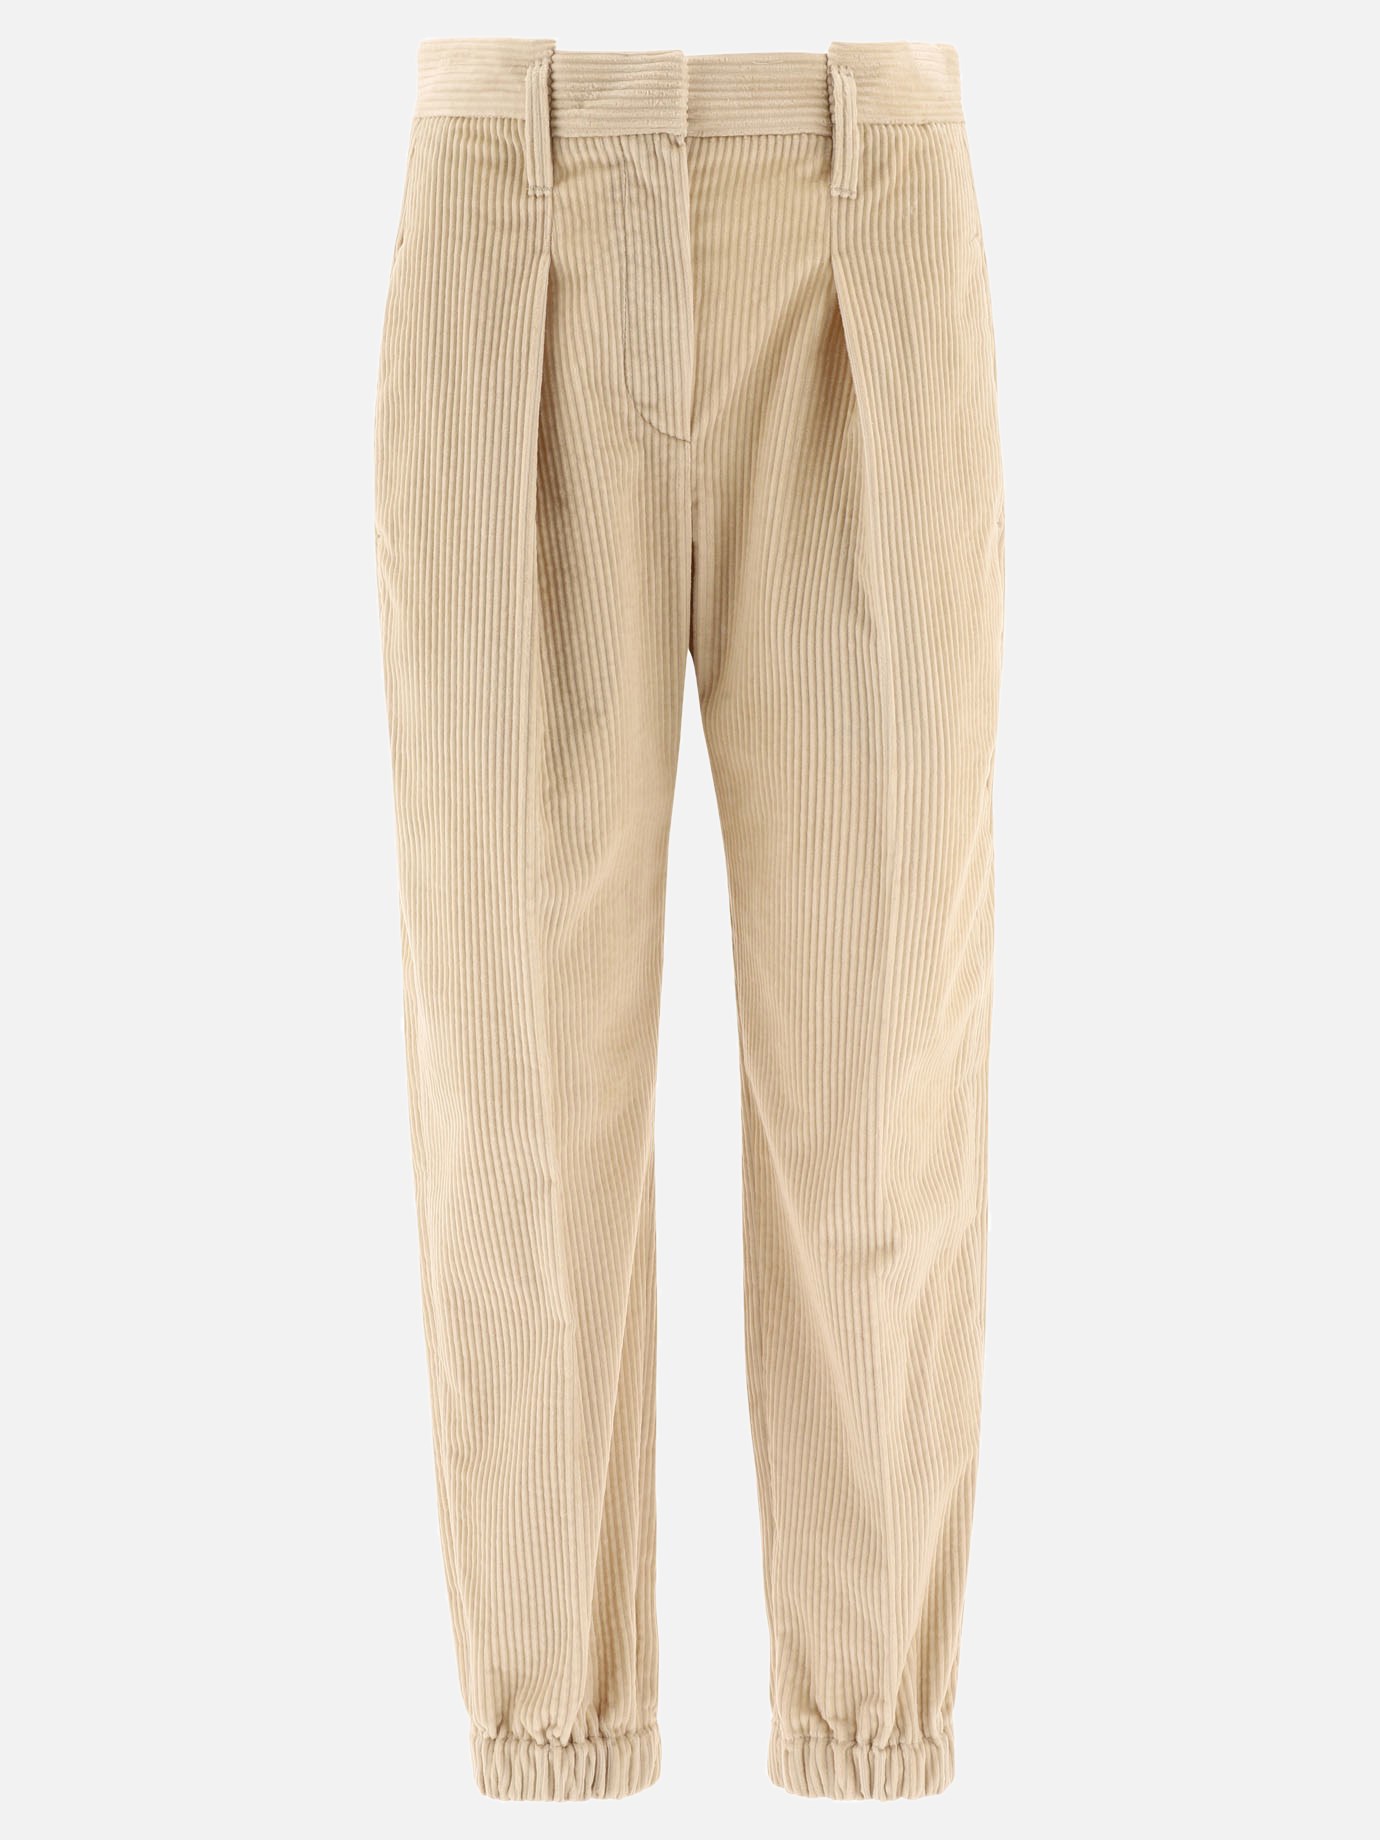 Ribbed stretch trousersby Brunello Cucinelli - 4